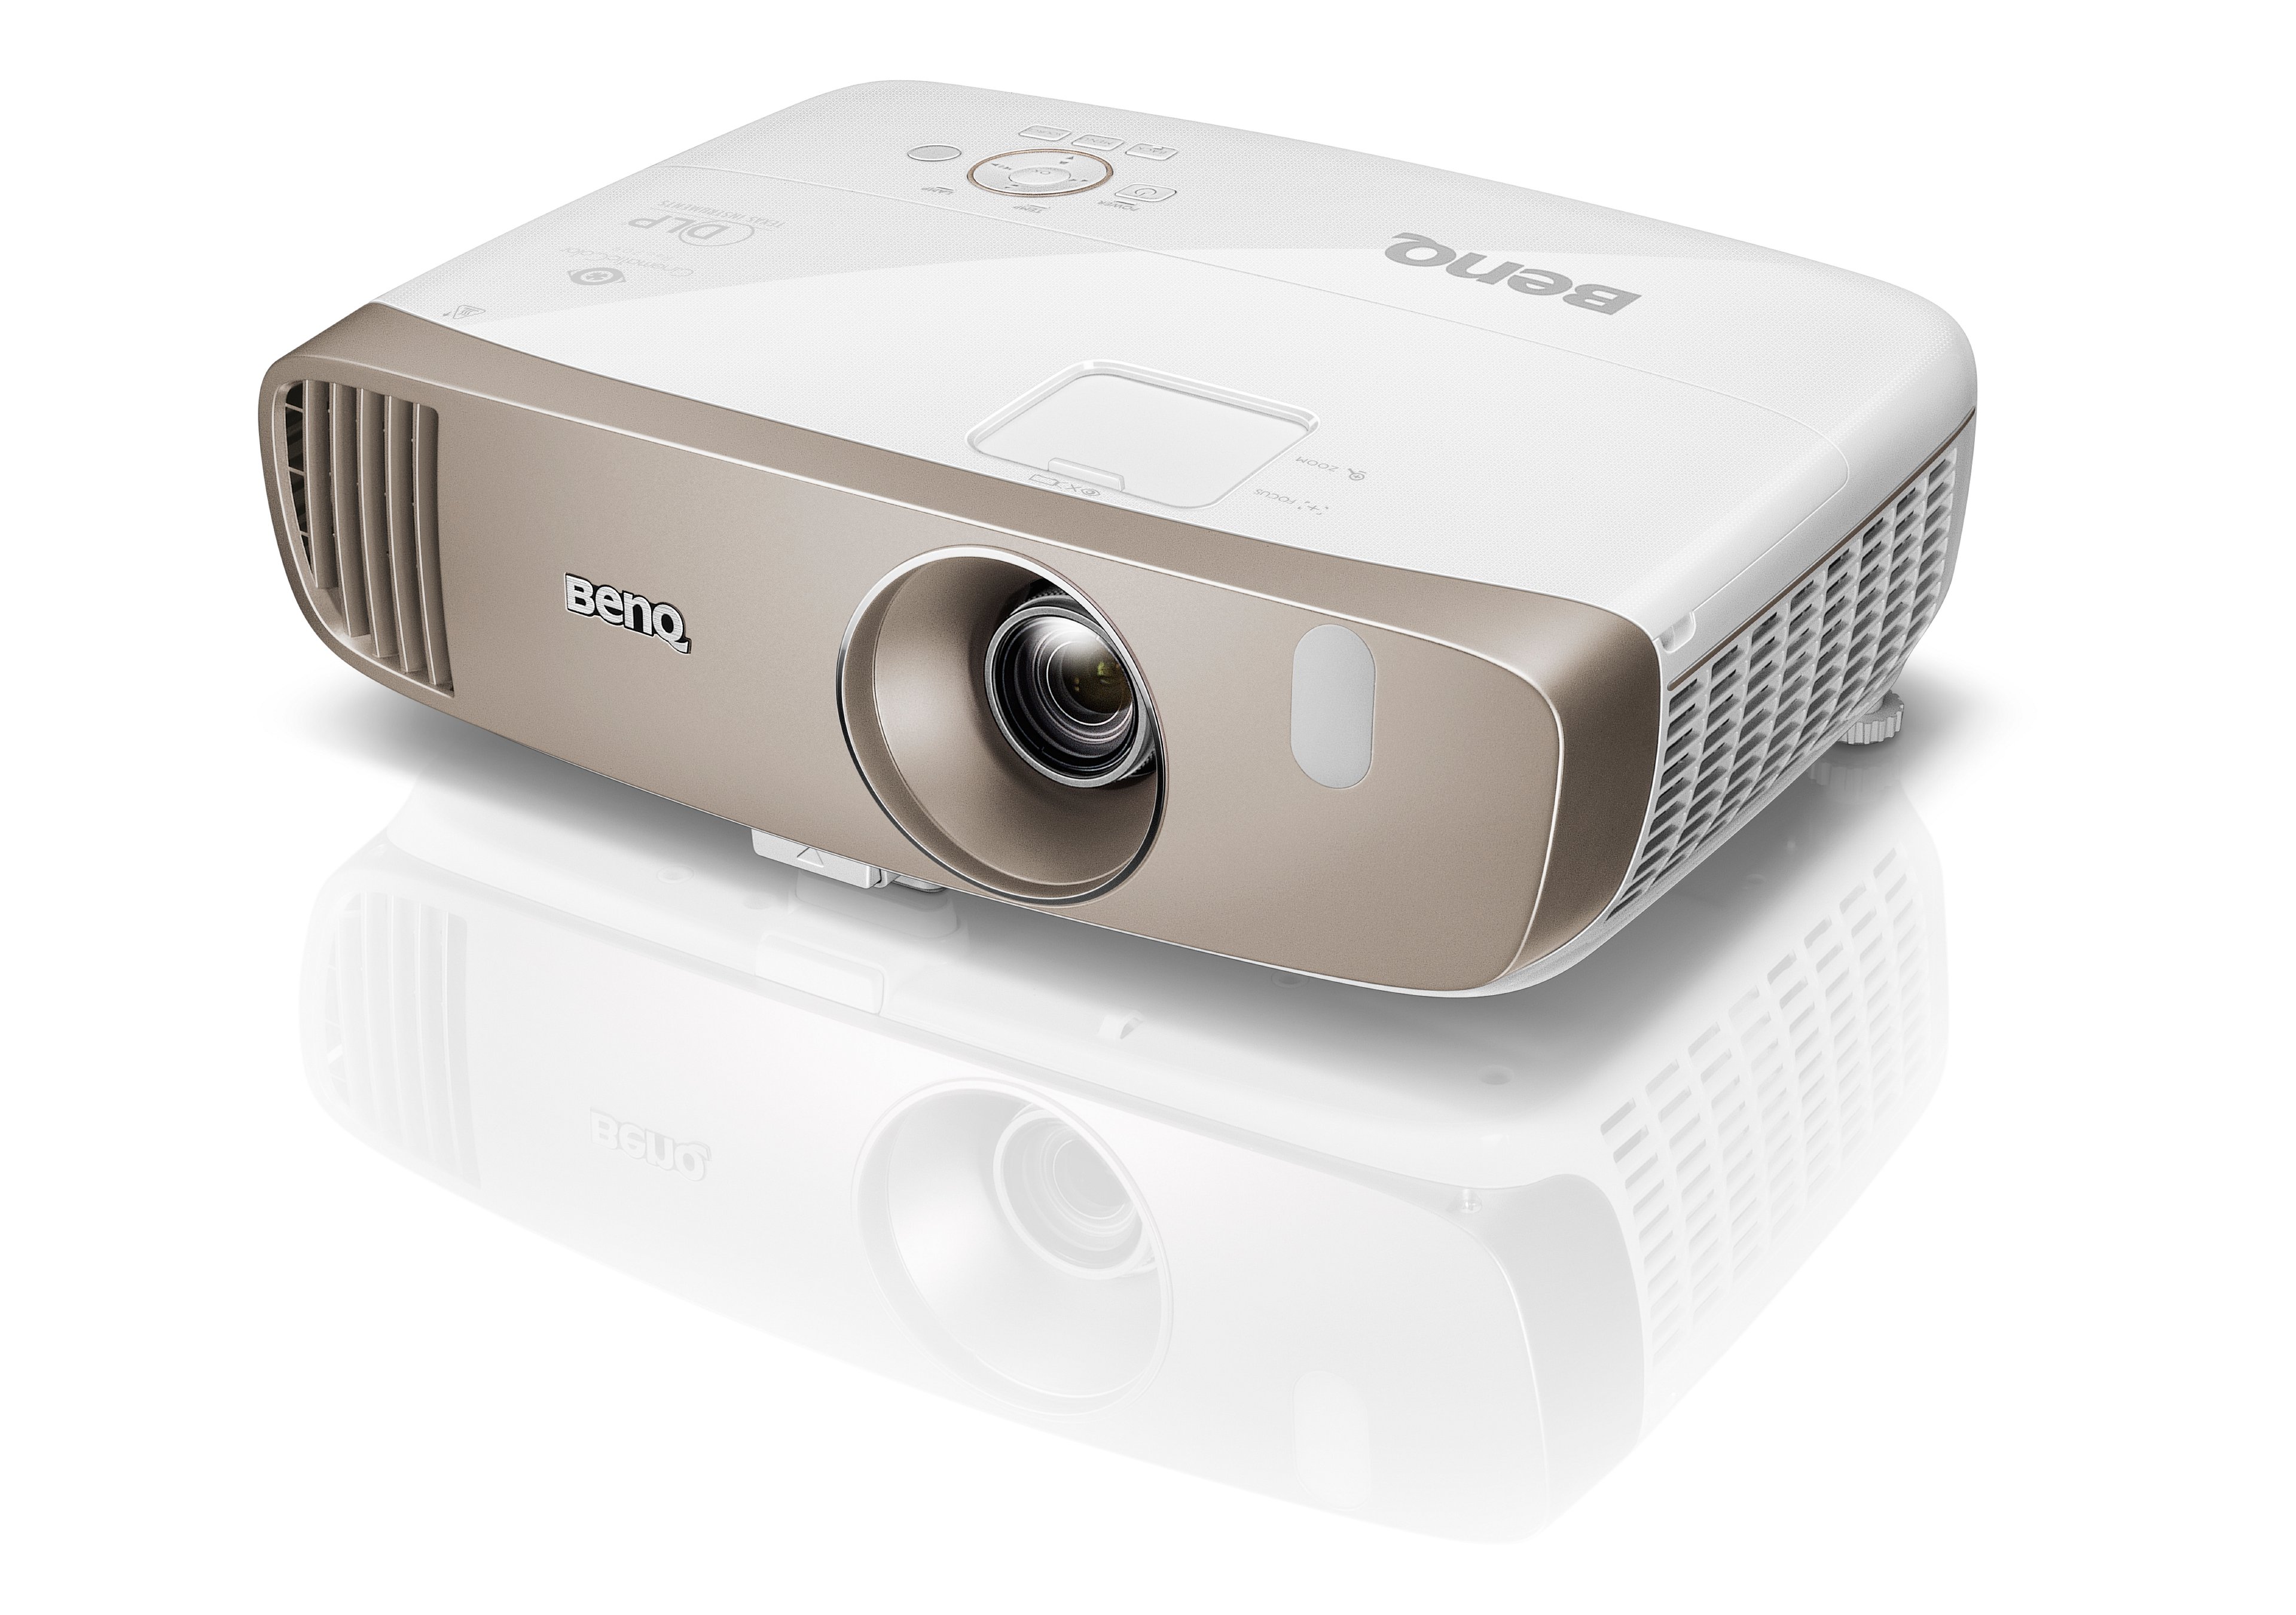 benq-home-video-projectors-take-home-theater-to-a-new-level-02